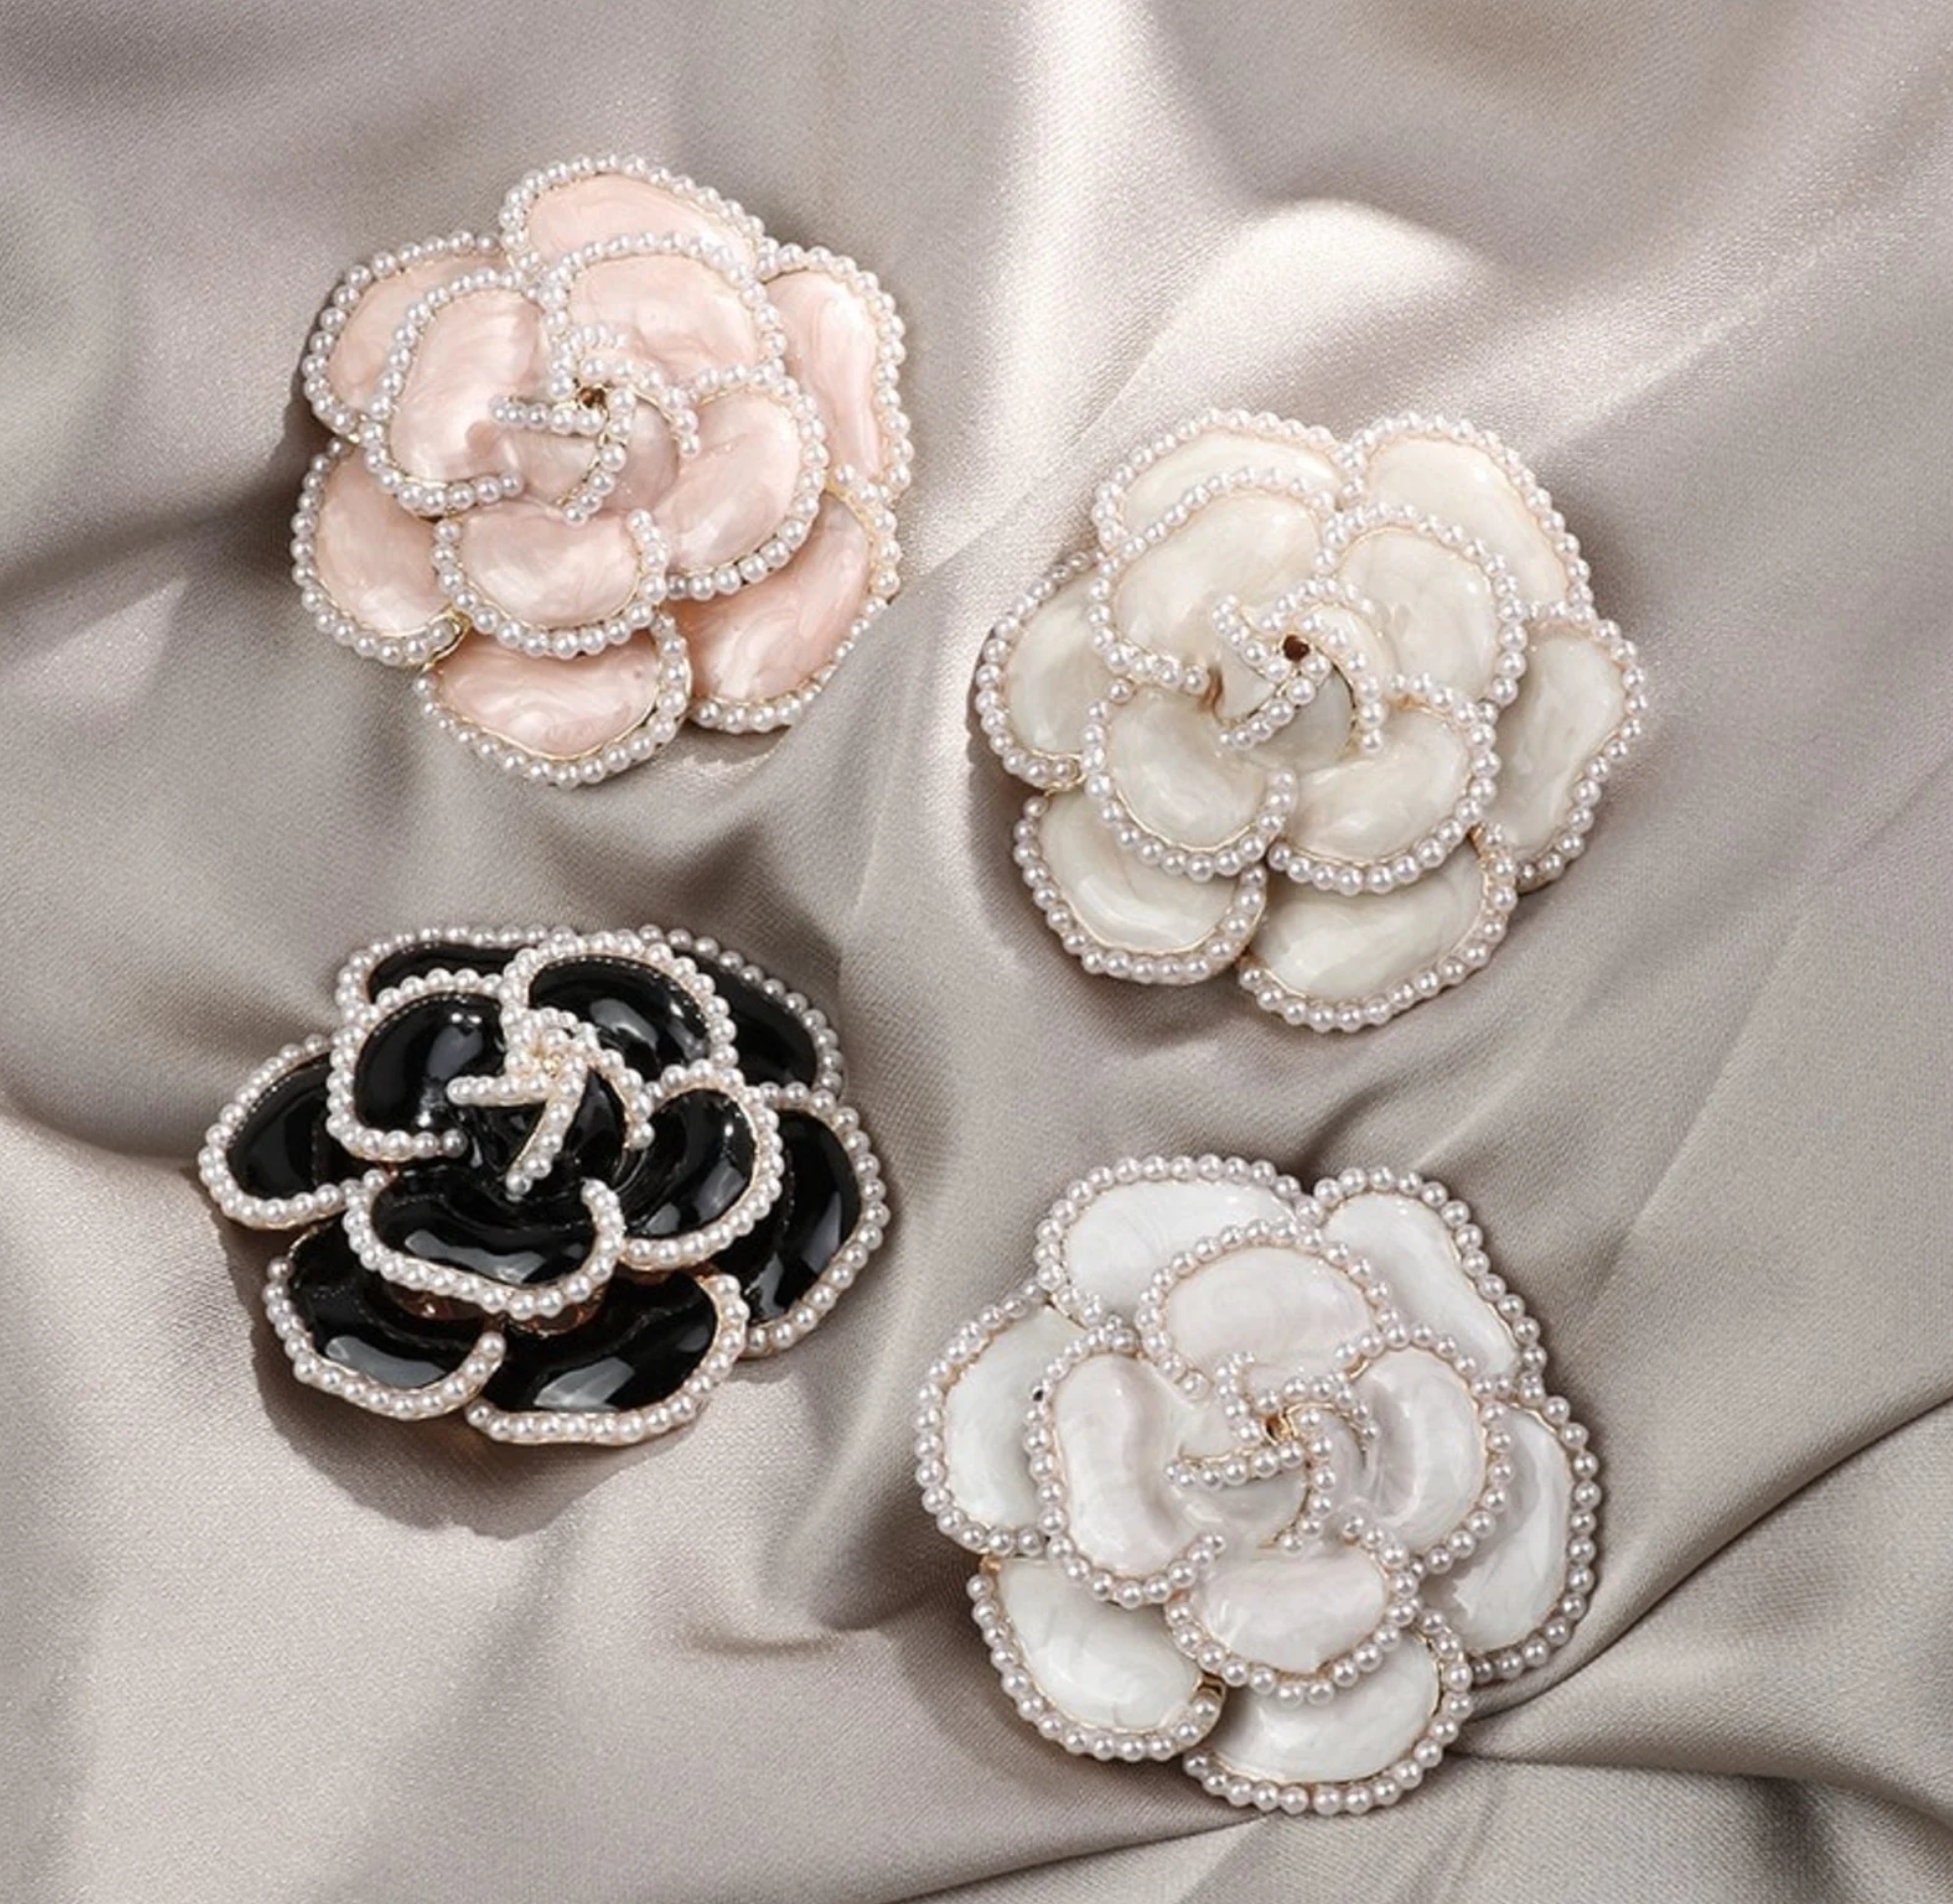 CHANEL Paris 1990's Pink Fabric Camellia Flower Brooch